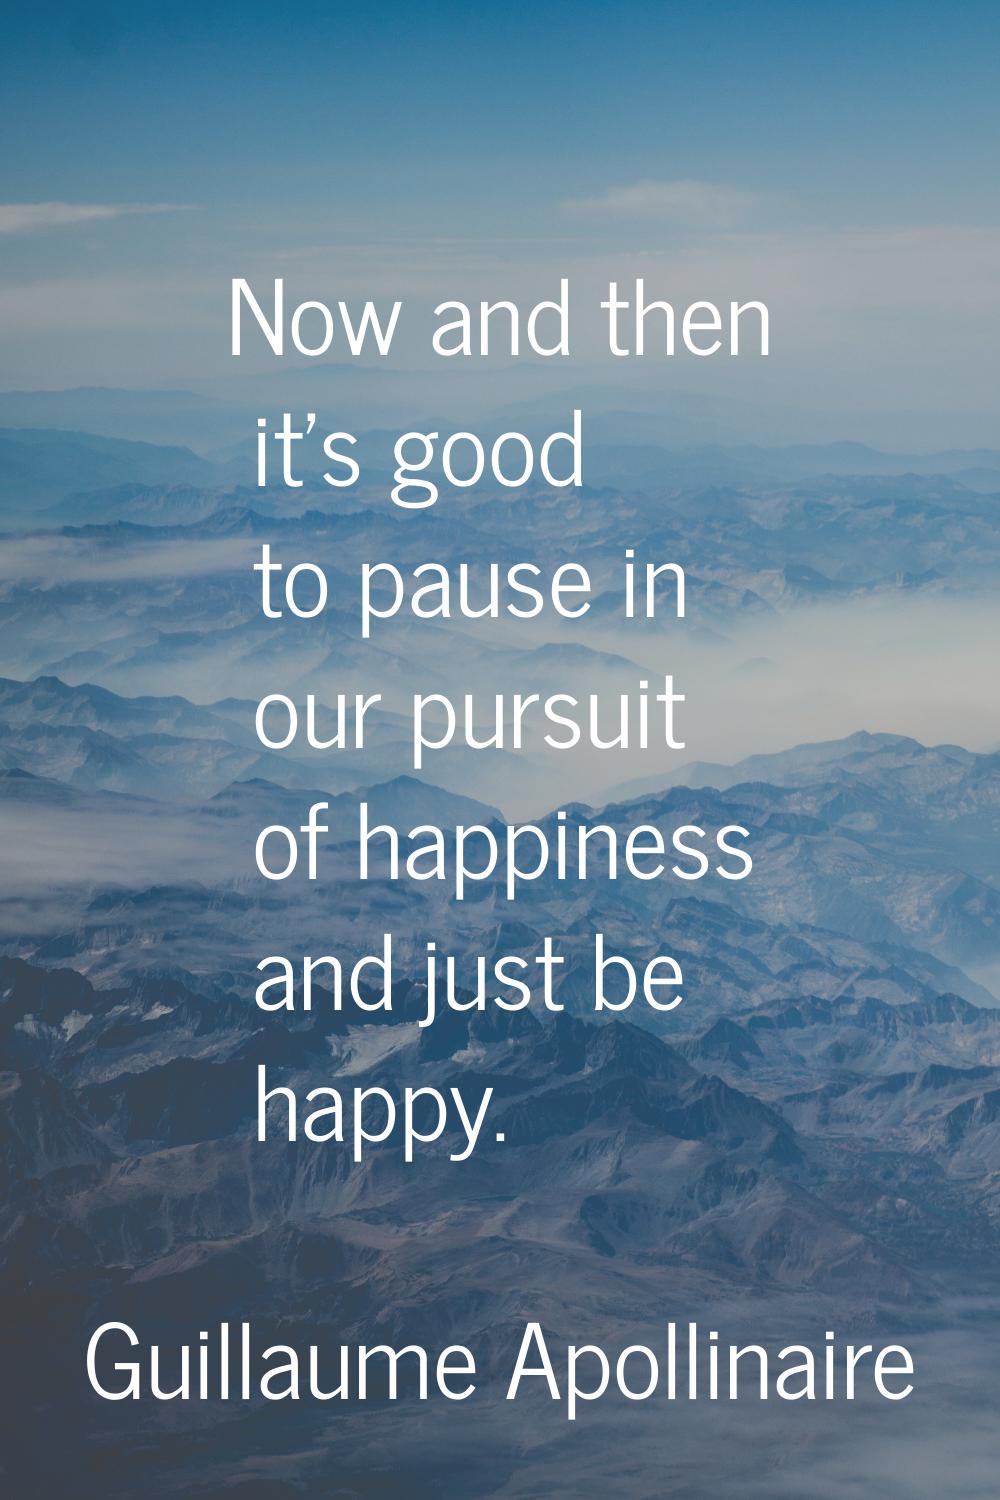 Now and then it's good to pause in our pursuit of happiness and just be happy.